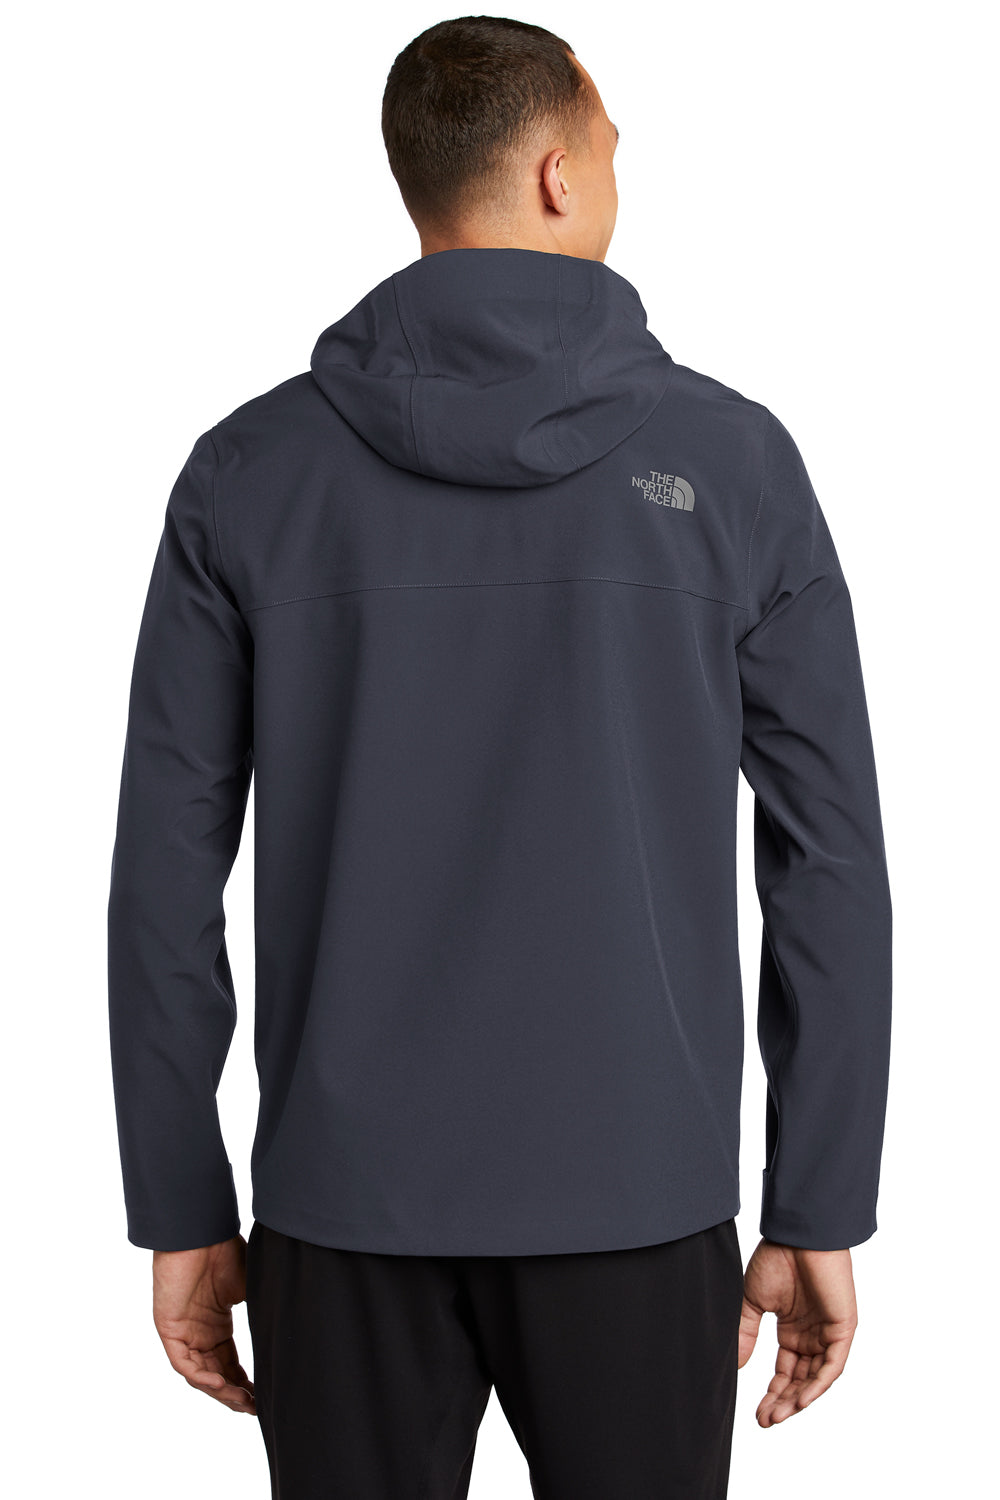 The North Face Mens Apex DryVent Full Zip Hooded Jacket Urban Navy Blue Side